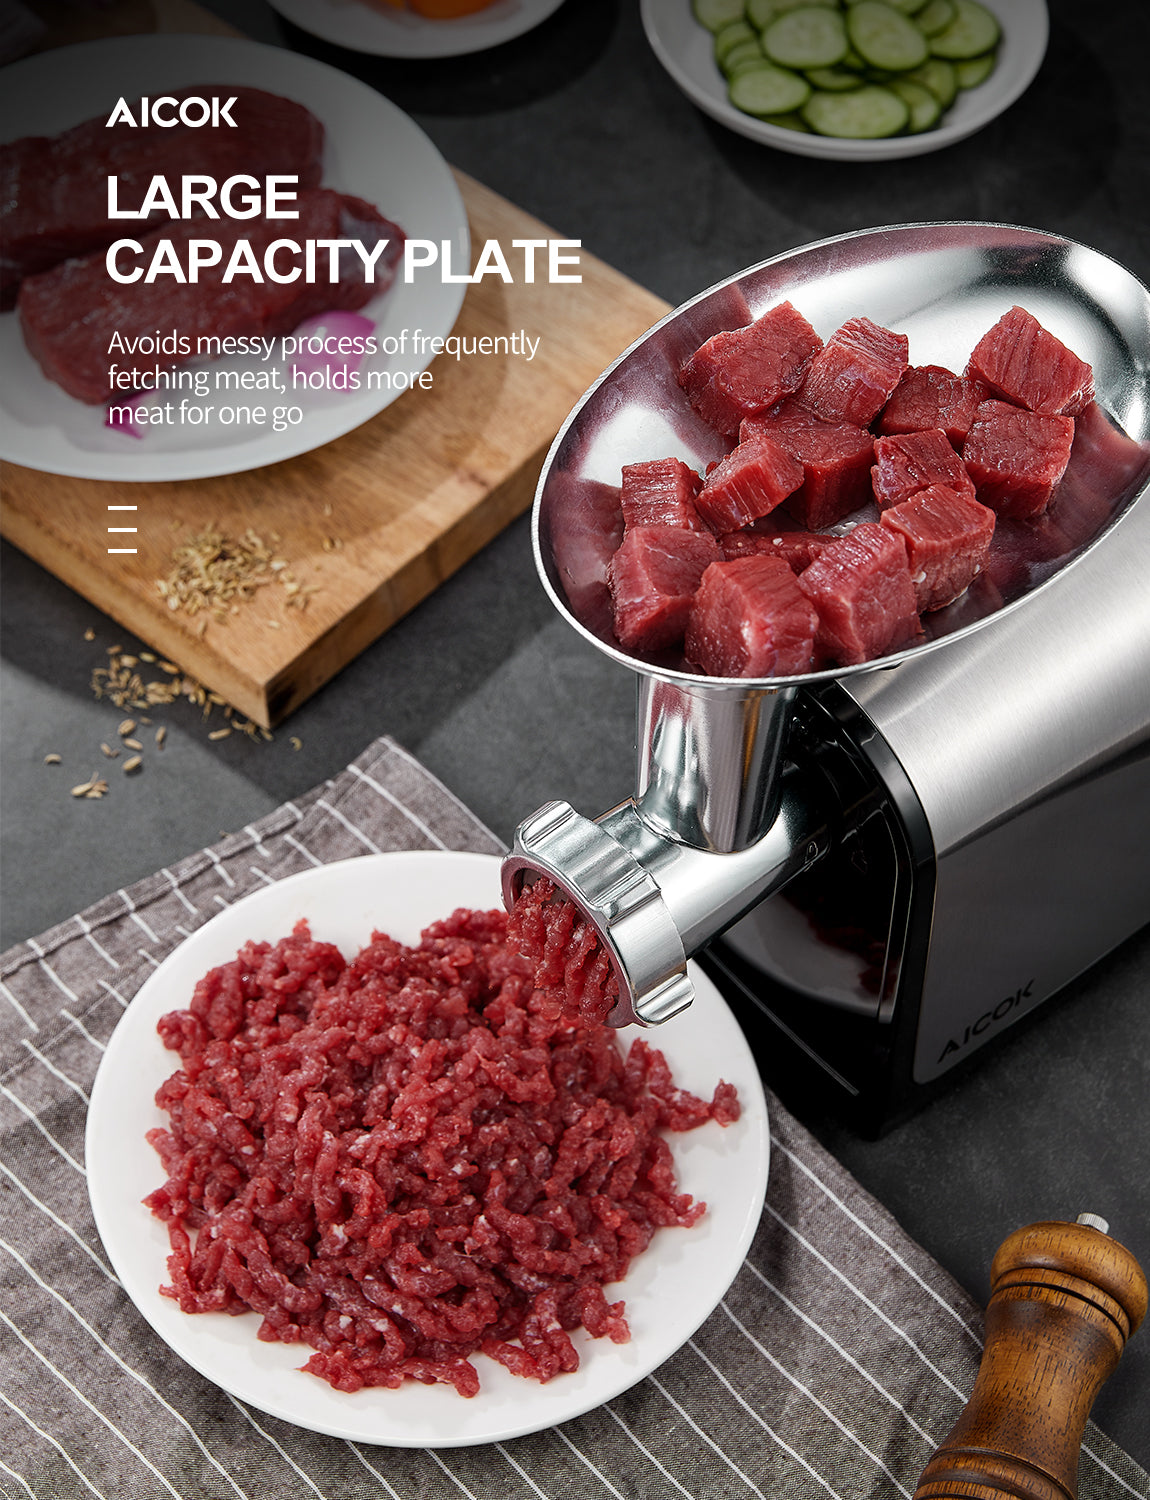 AICOK -Meat Grinder, 3-IN-1 Stainless Steel Meat Mincer, Sausage Stuffer, [2000W Max] Food Grinder MG-2430RB, large capacity plate, fresh meat, minced pork 